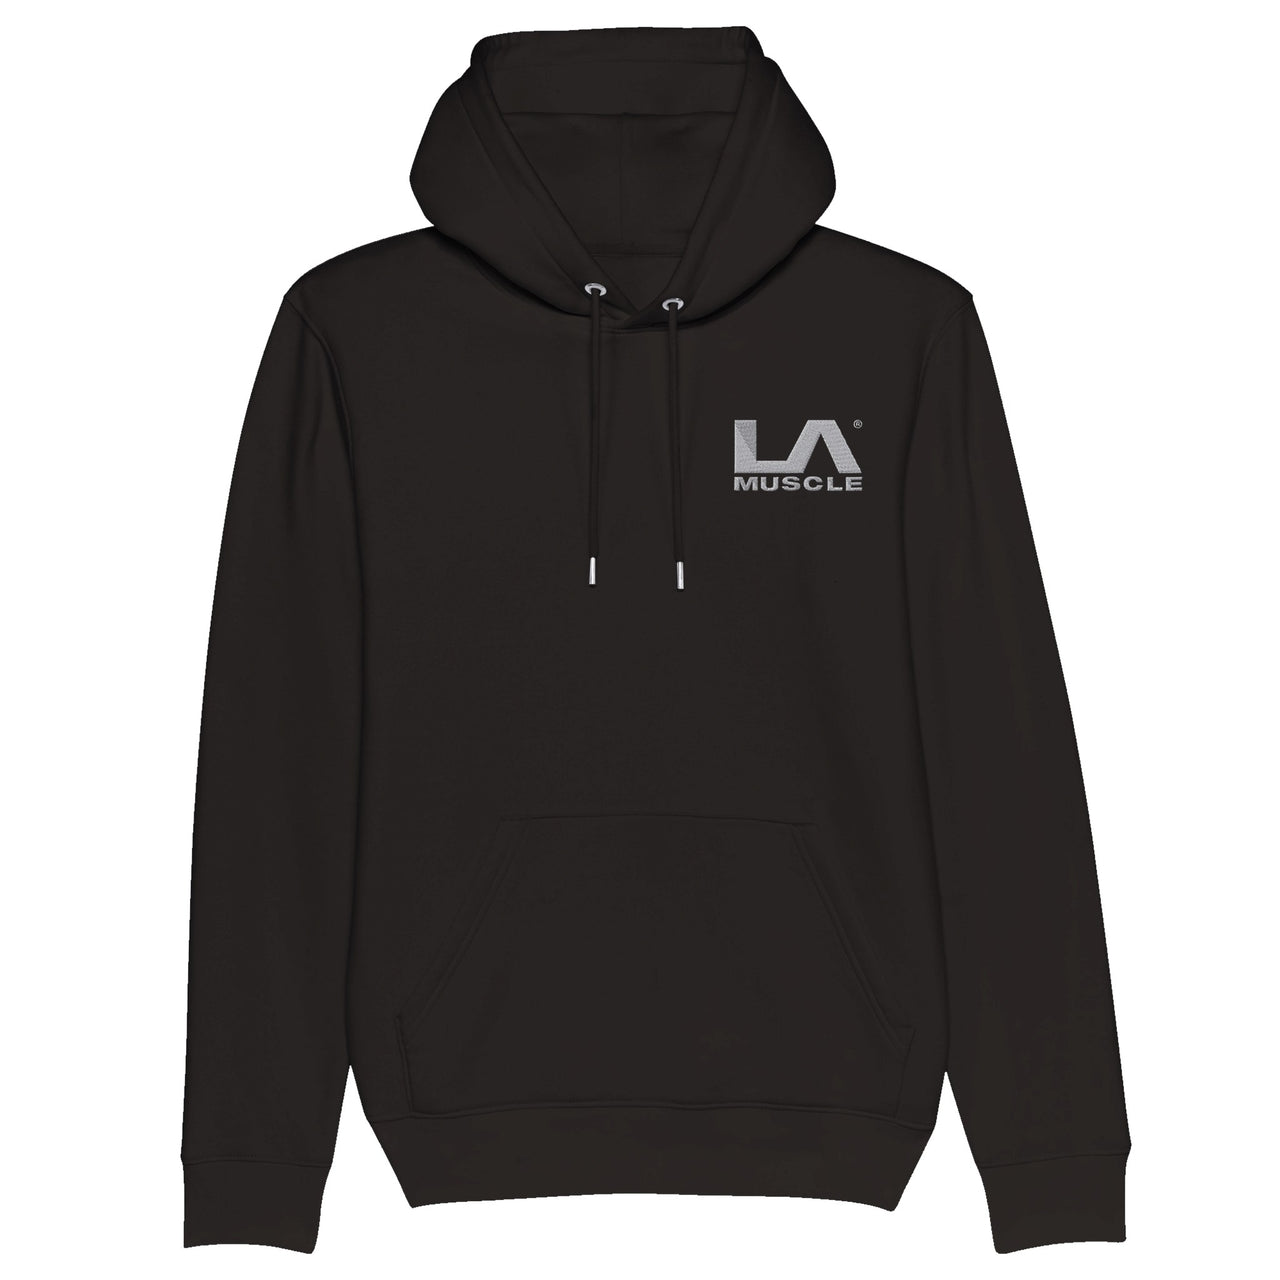 PREMIUM Official LA MUSCLE EMBROIDERED Organic Unisex Pullover Hoodie for life